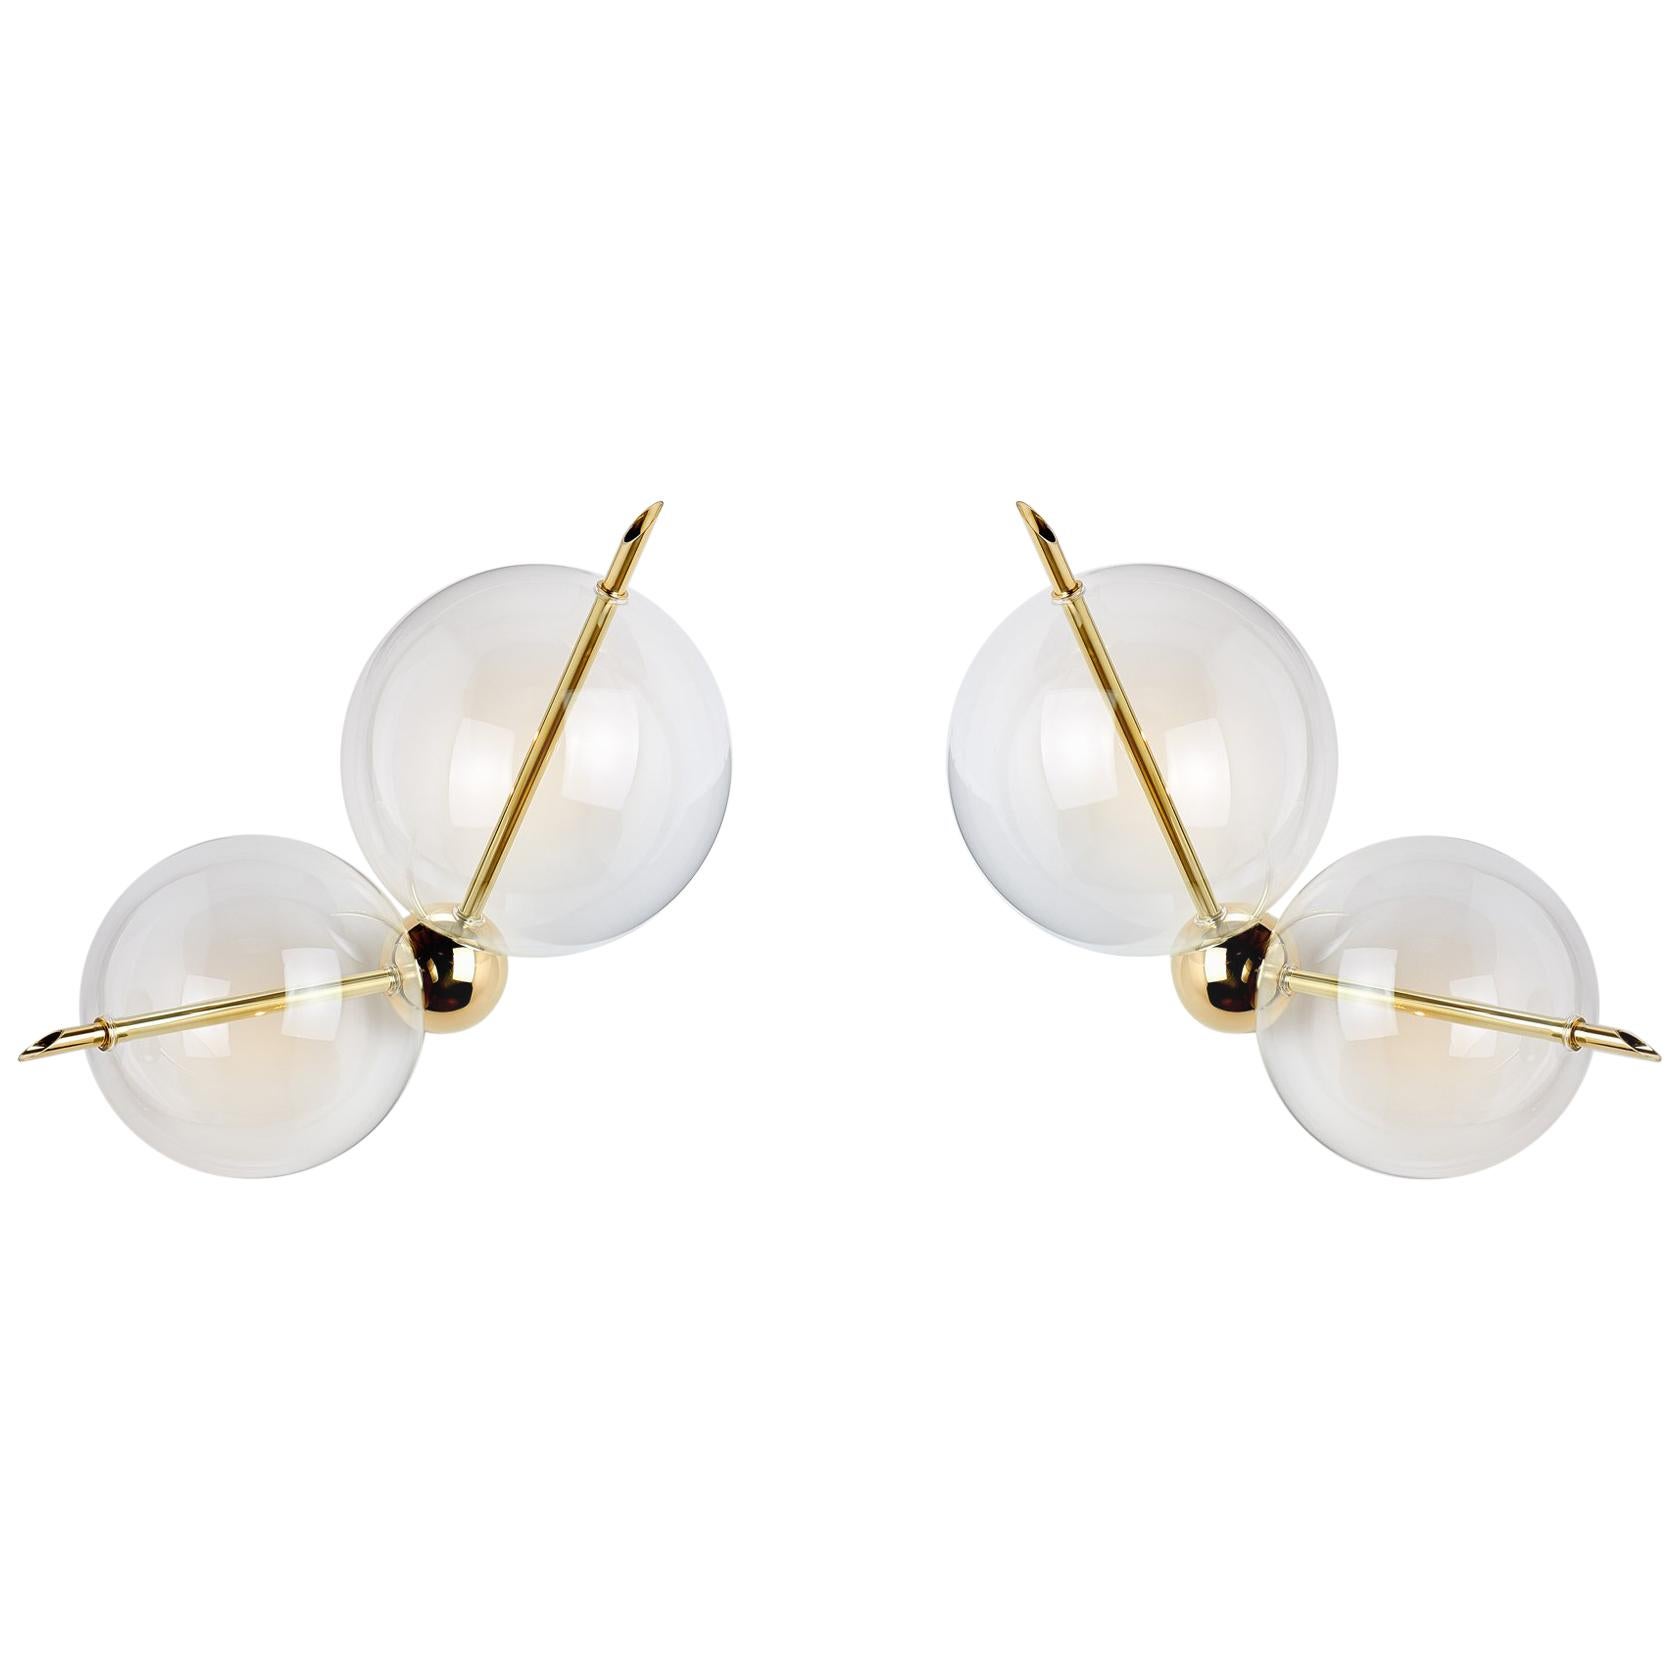 Lune Duo Contemporary Couple of Sconces / Wall Lights Polished Brass Blown Glass